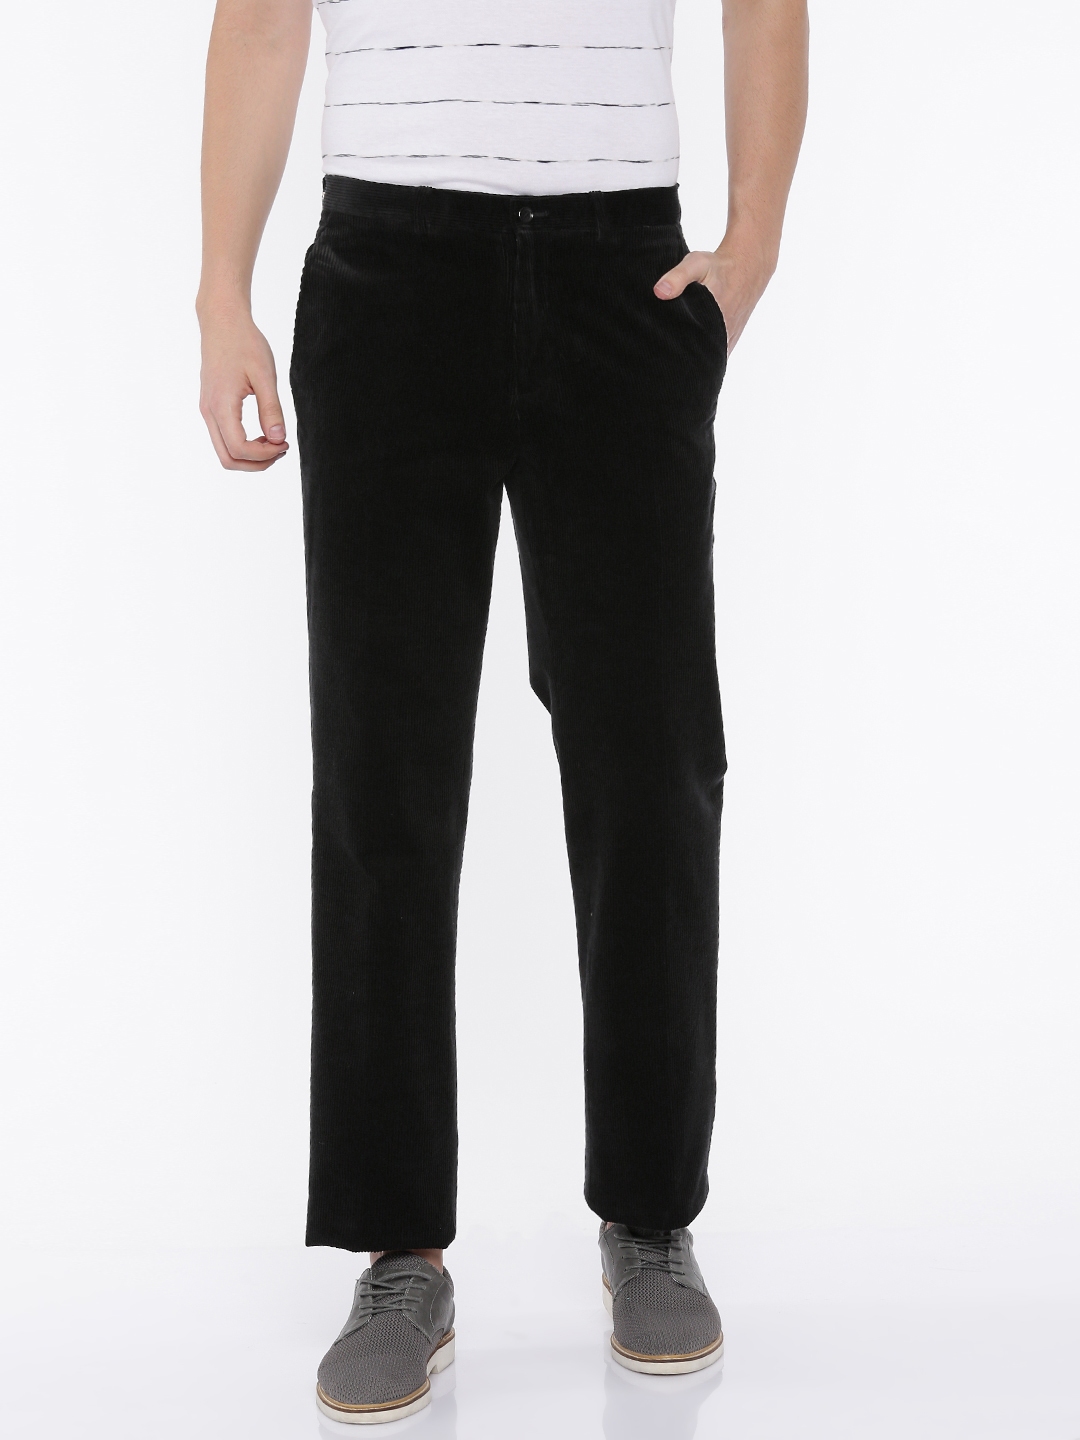 Navy Blue Corduroy Trousers  Mens Country Clothing  Cordings